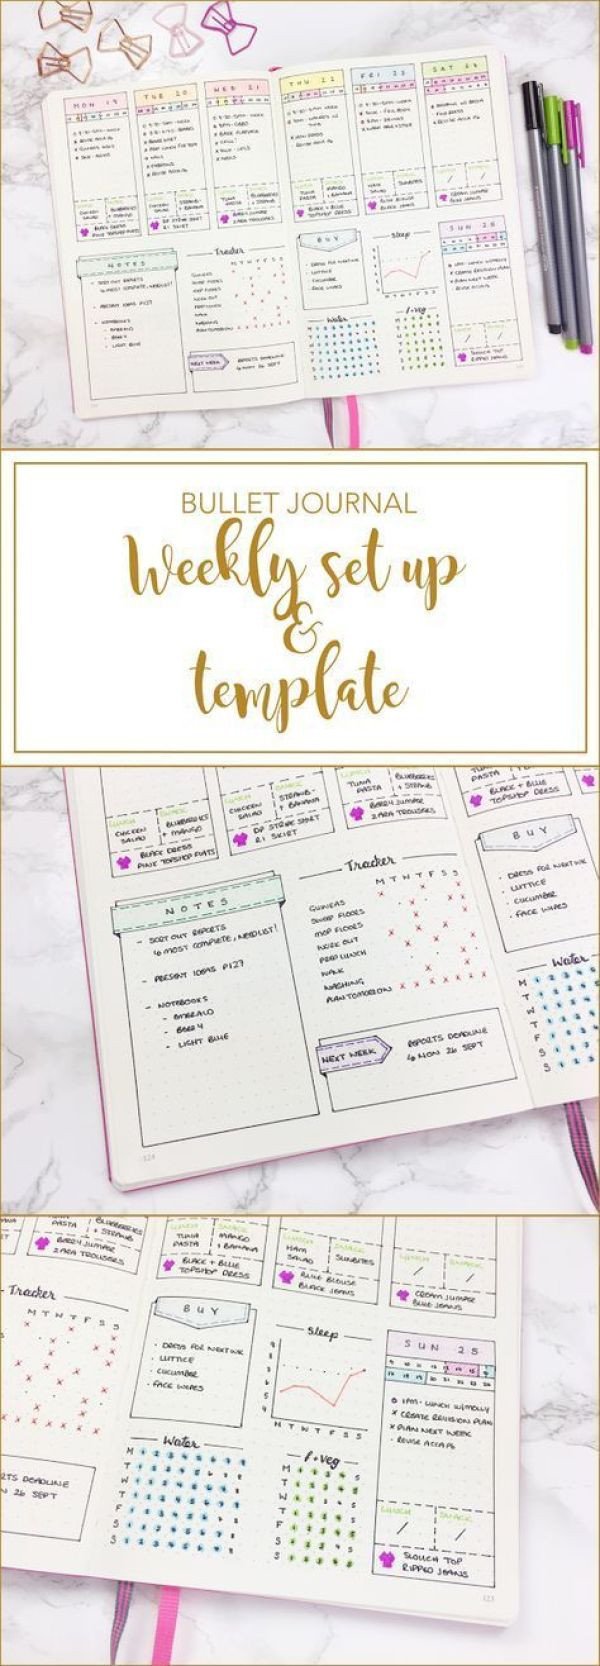 Bullet Journal Layout Templates 15 the Best Weekly Bullet Journal Layouts the